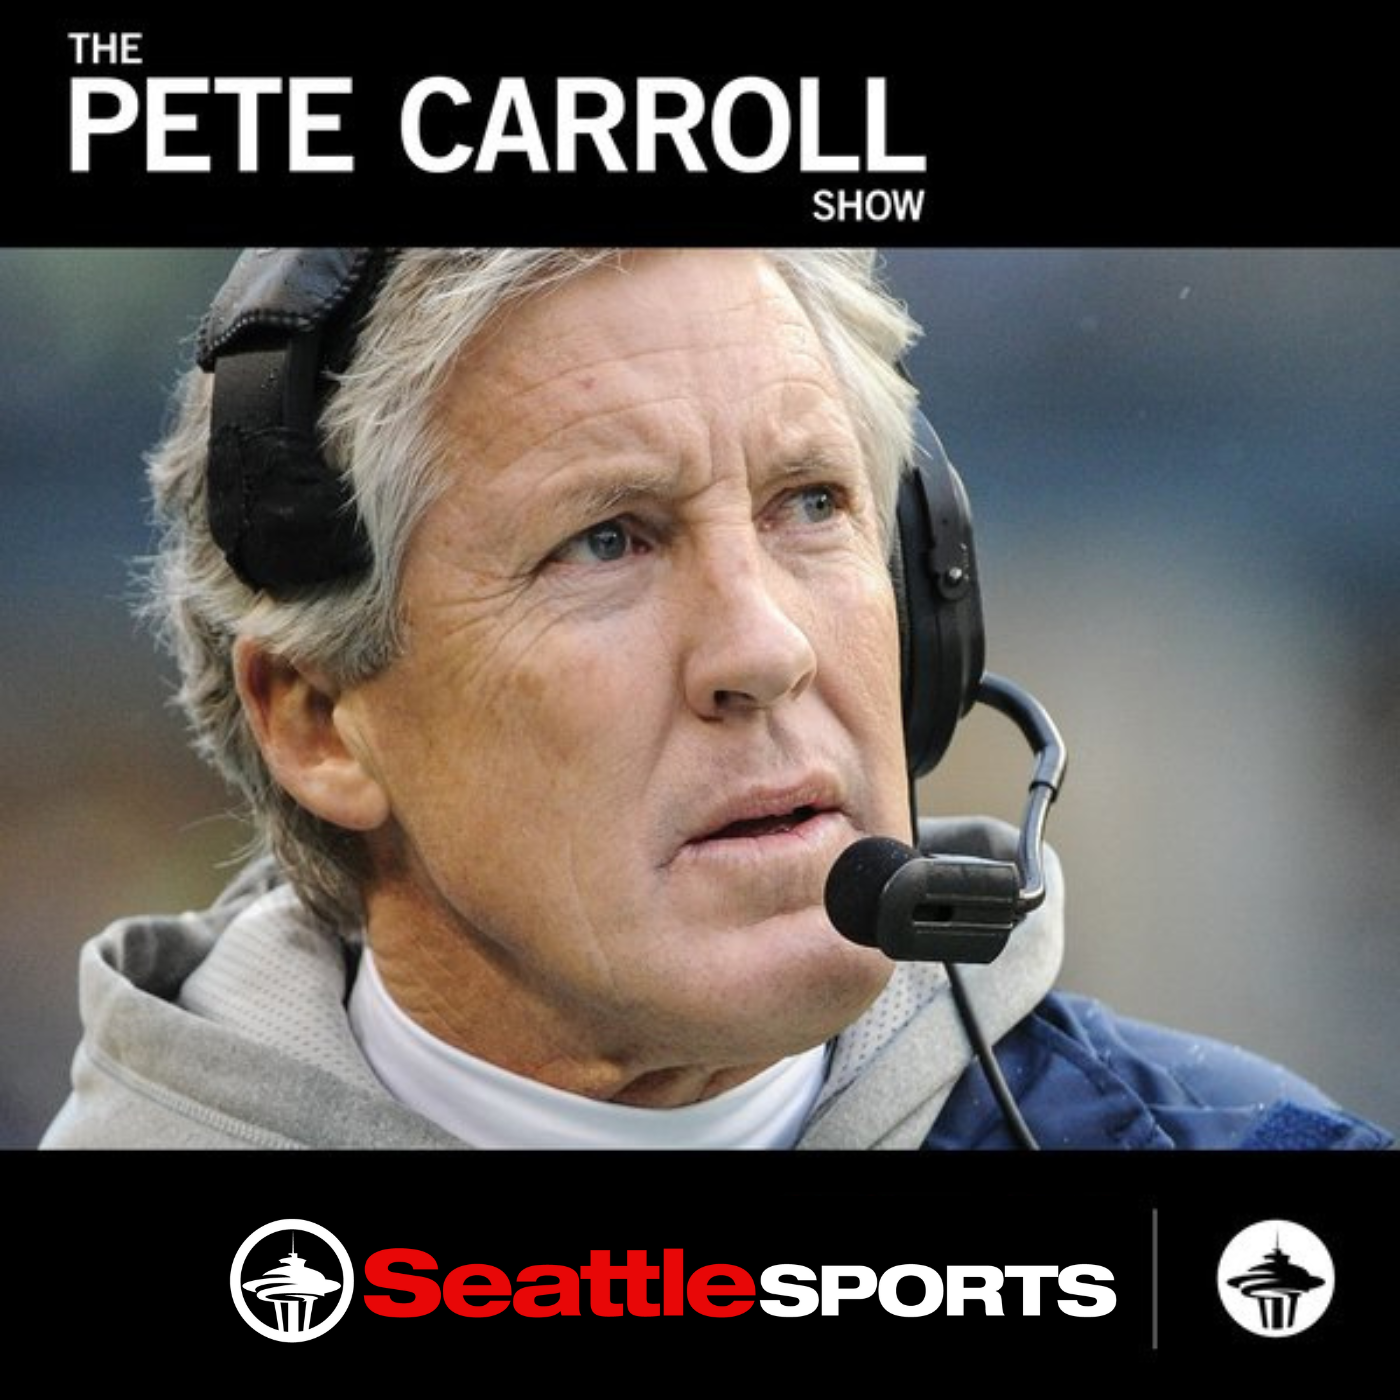 Pete Carroll-On the Seahawks "disappointing" showing in week one